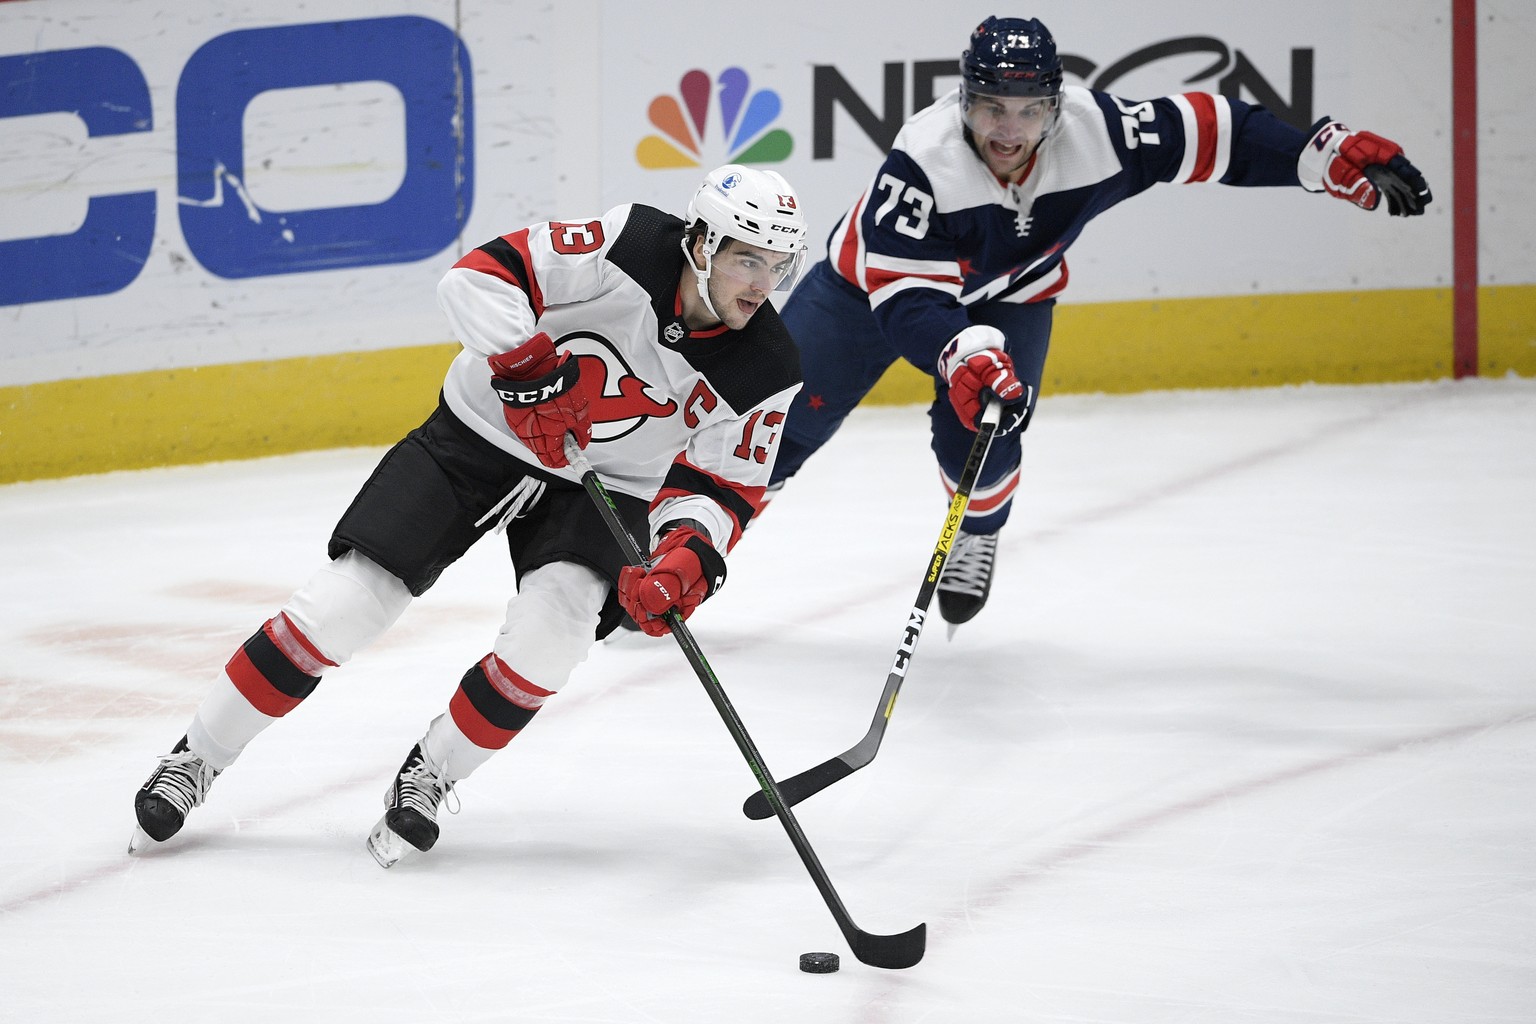 New Jersey Devils center Nico Hischier (13) skates with the puck in front of Washington Capitals left wing Conor Sheary (73) during the first period of an NHL hockey game, Sunday, Feb. 21, 2021, in Wa ...